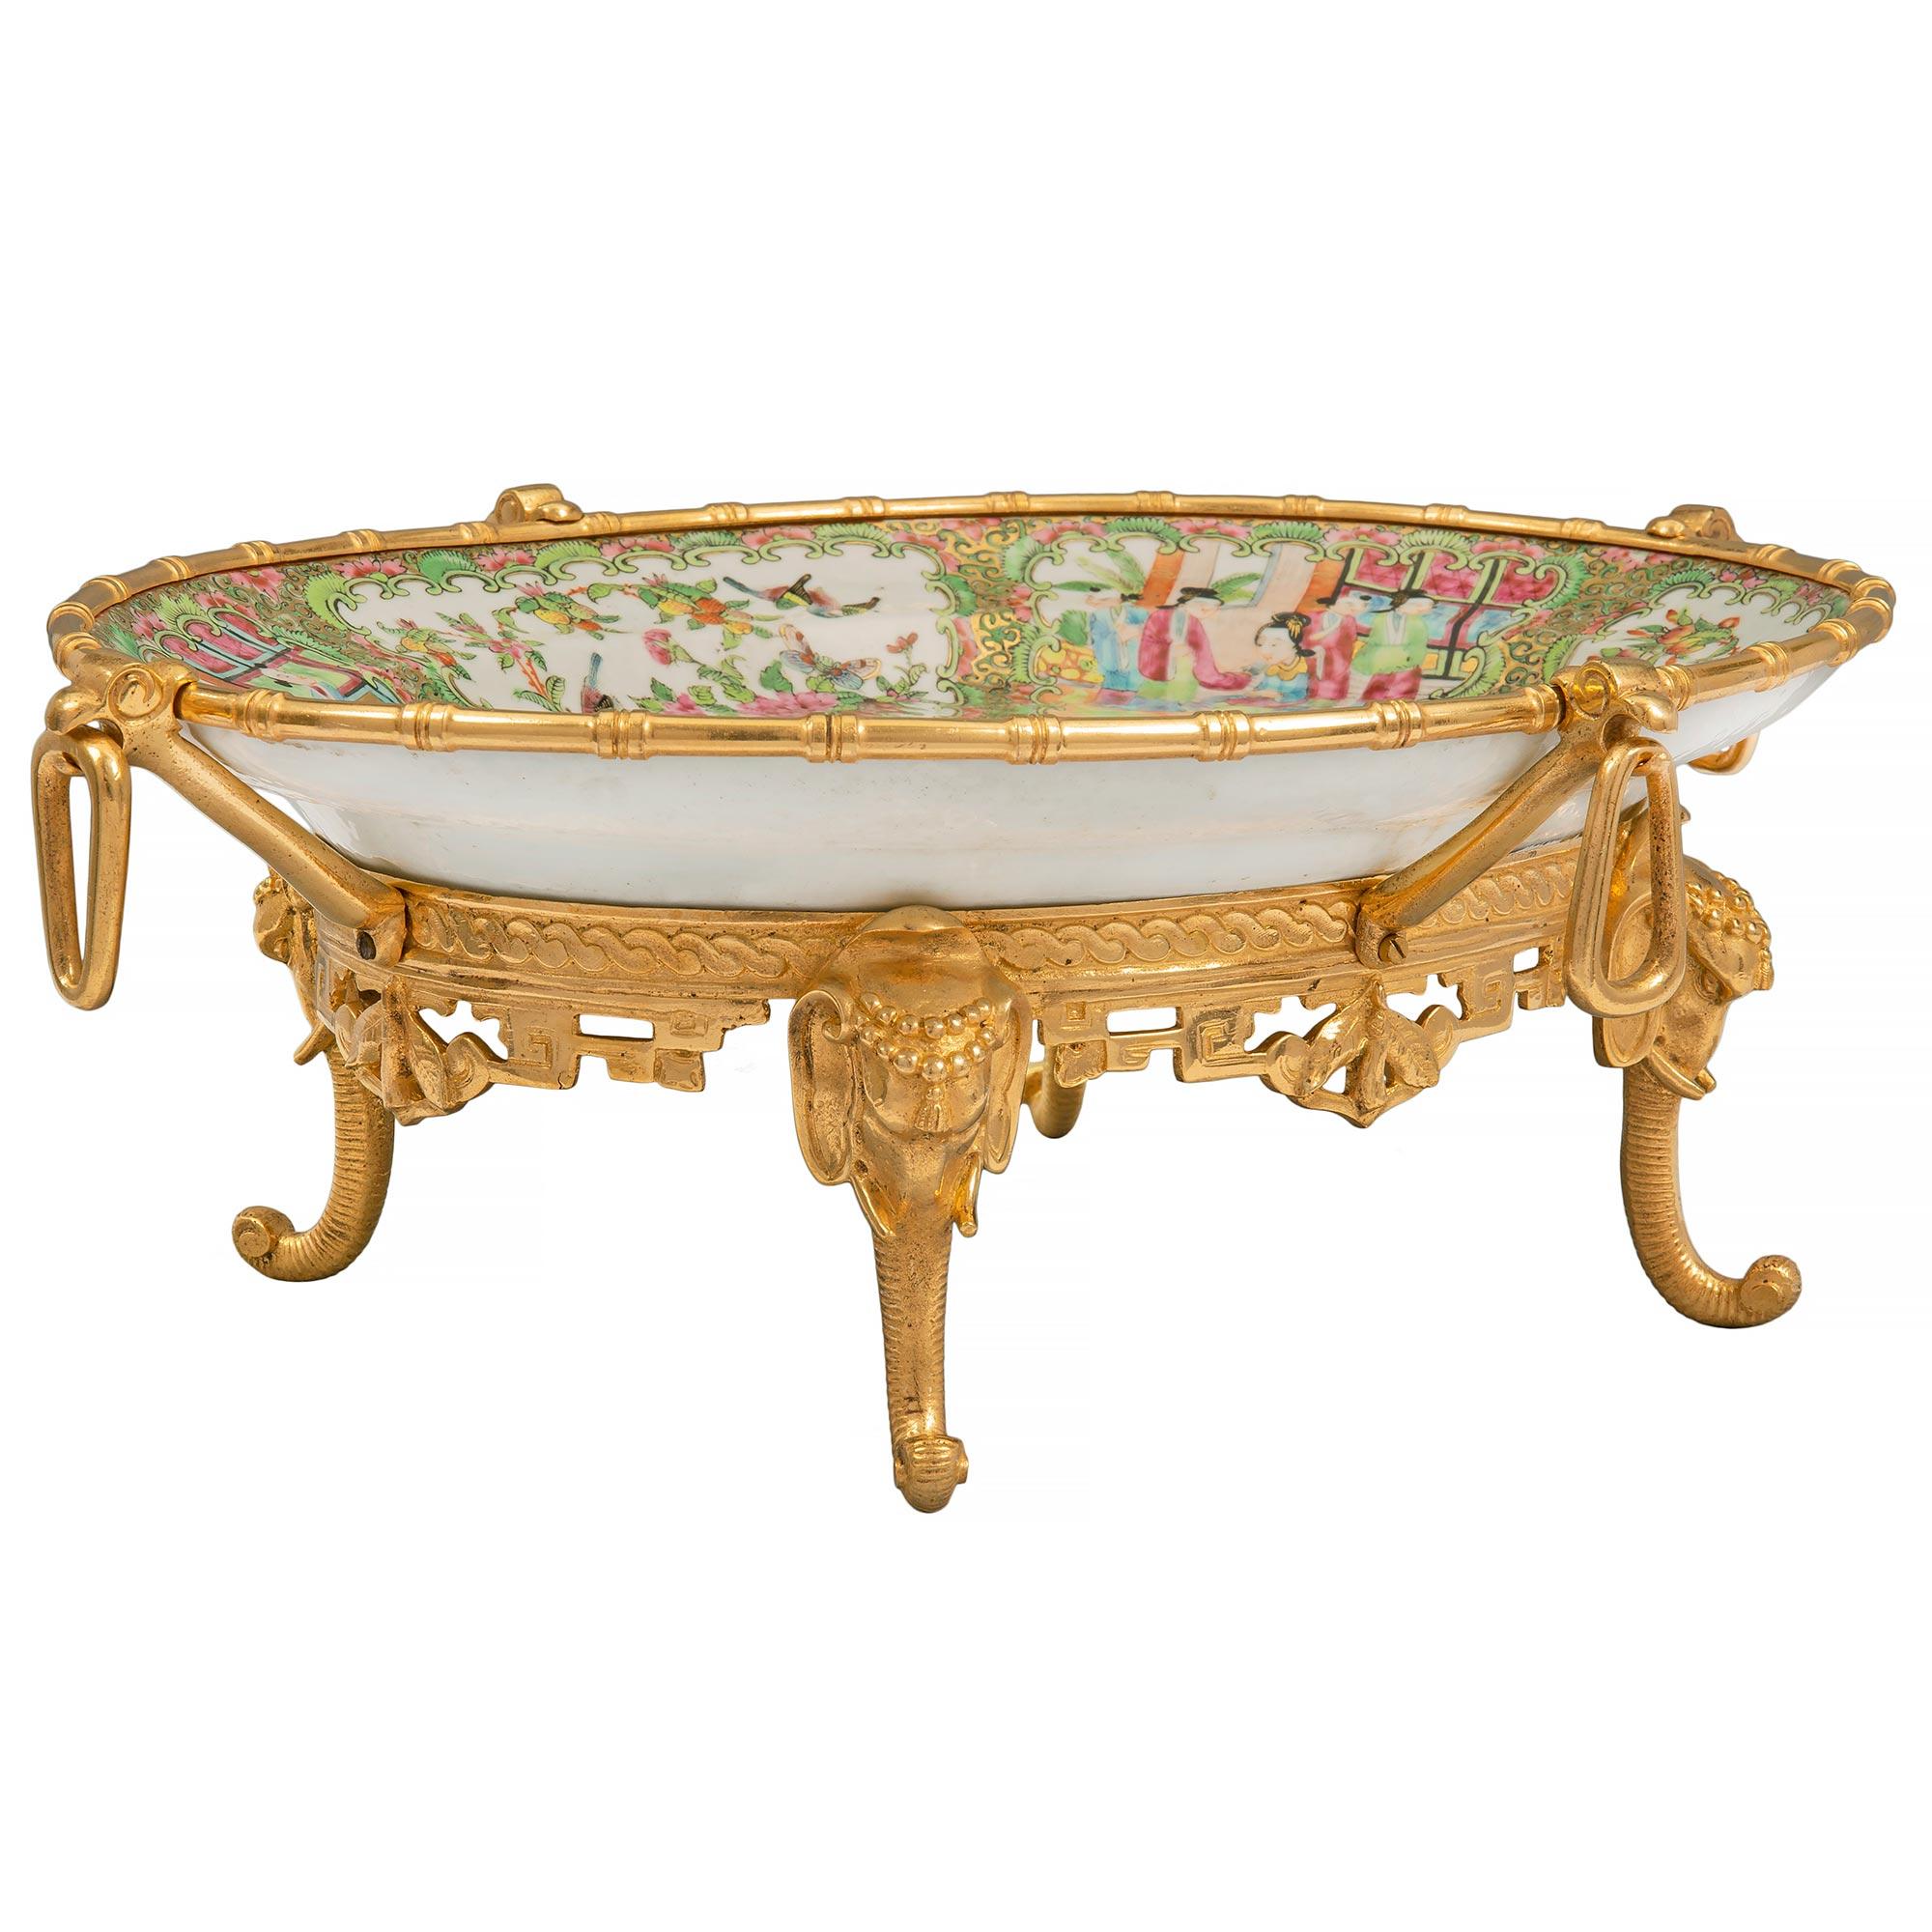 A most elegant 19th Century Chinese export Famille rose porcelain bowl, fitted with French 19th century Louis XVI st. ormolu mounts. The centerpiece bowl is raised by a striking ormolu base with superb and most decorative elephant trunk feet. The